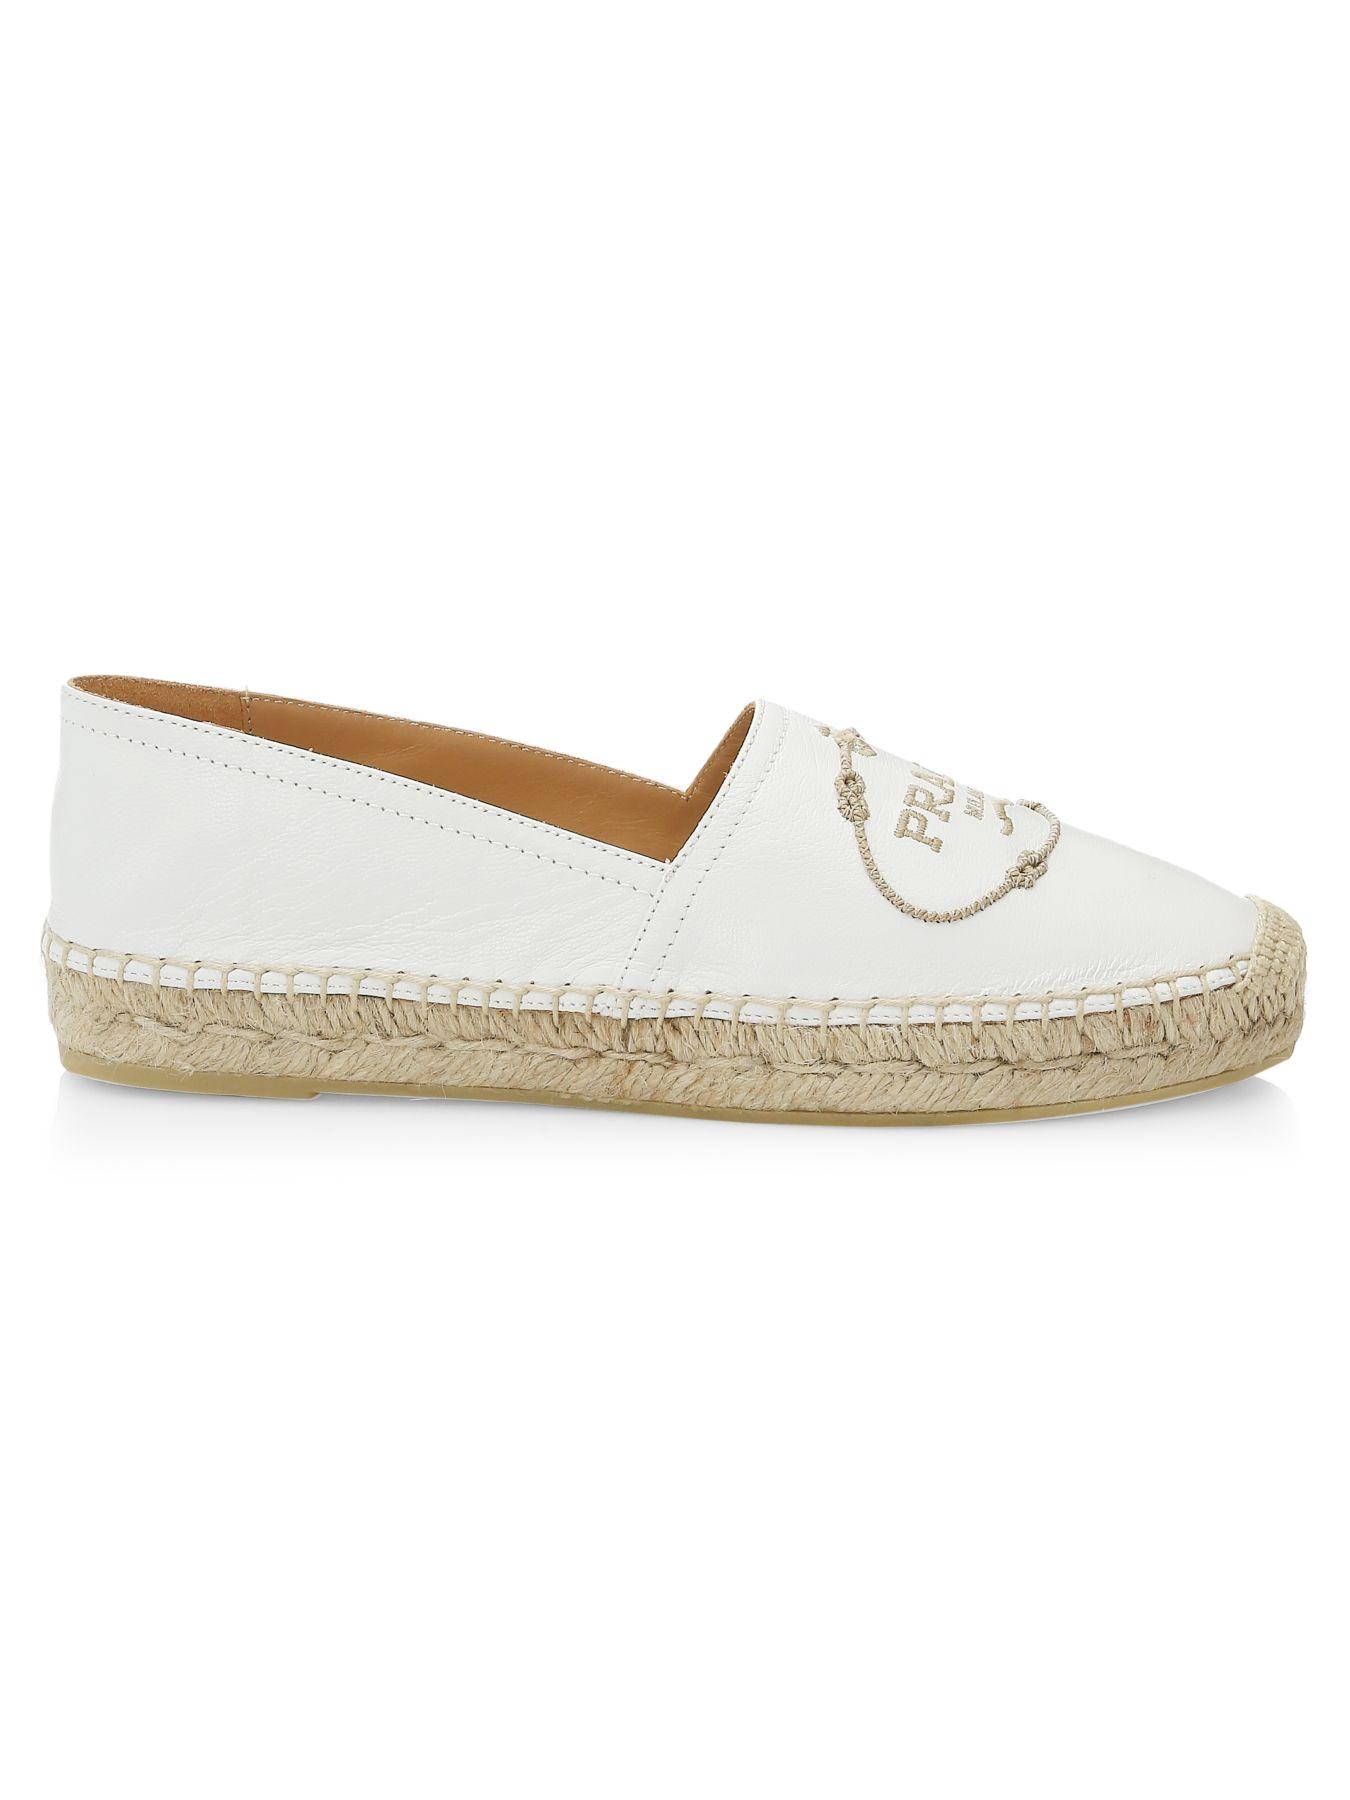 Prada Leather Embroidered Logo Espadrilles in White - Save 23% - Lyst